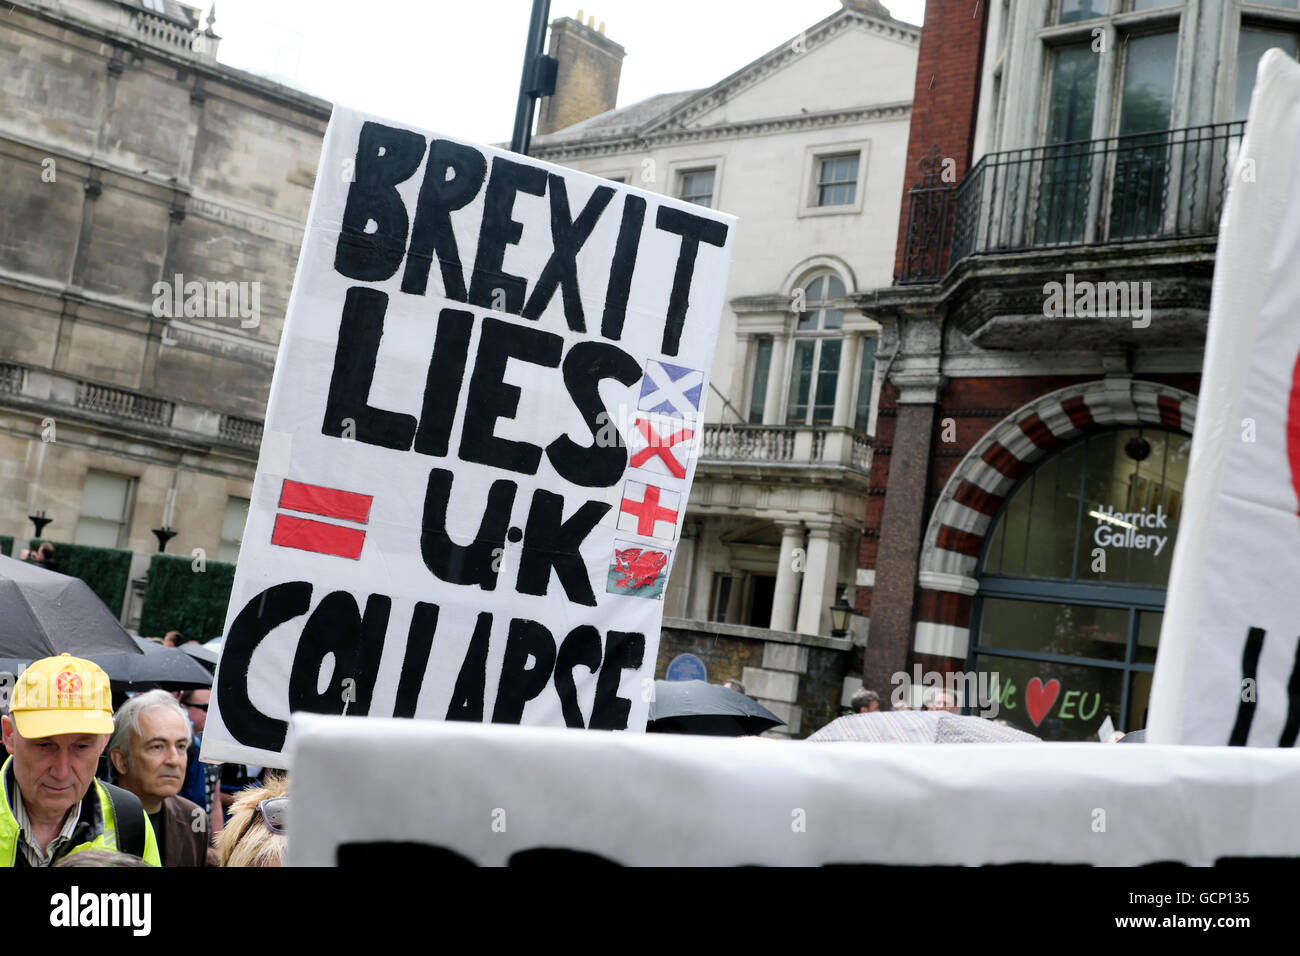 Brexit Lies UK Collapse poster at the Anti Brexit demo 'March for Europe' on 2nd July 2016  in London England  KATHY DEWITT Stock Photo